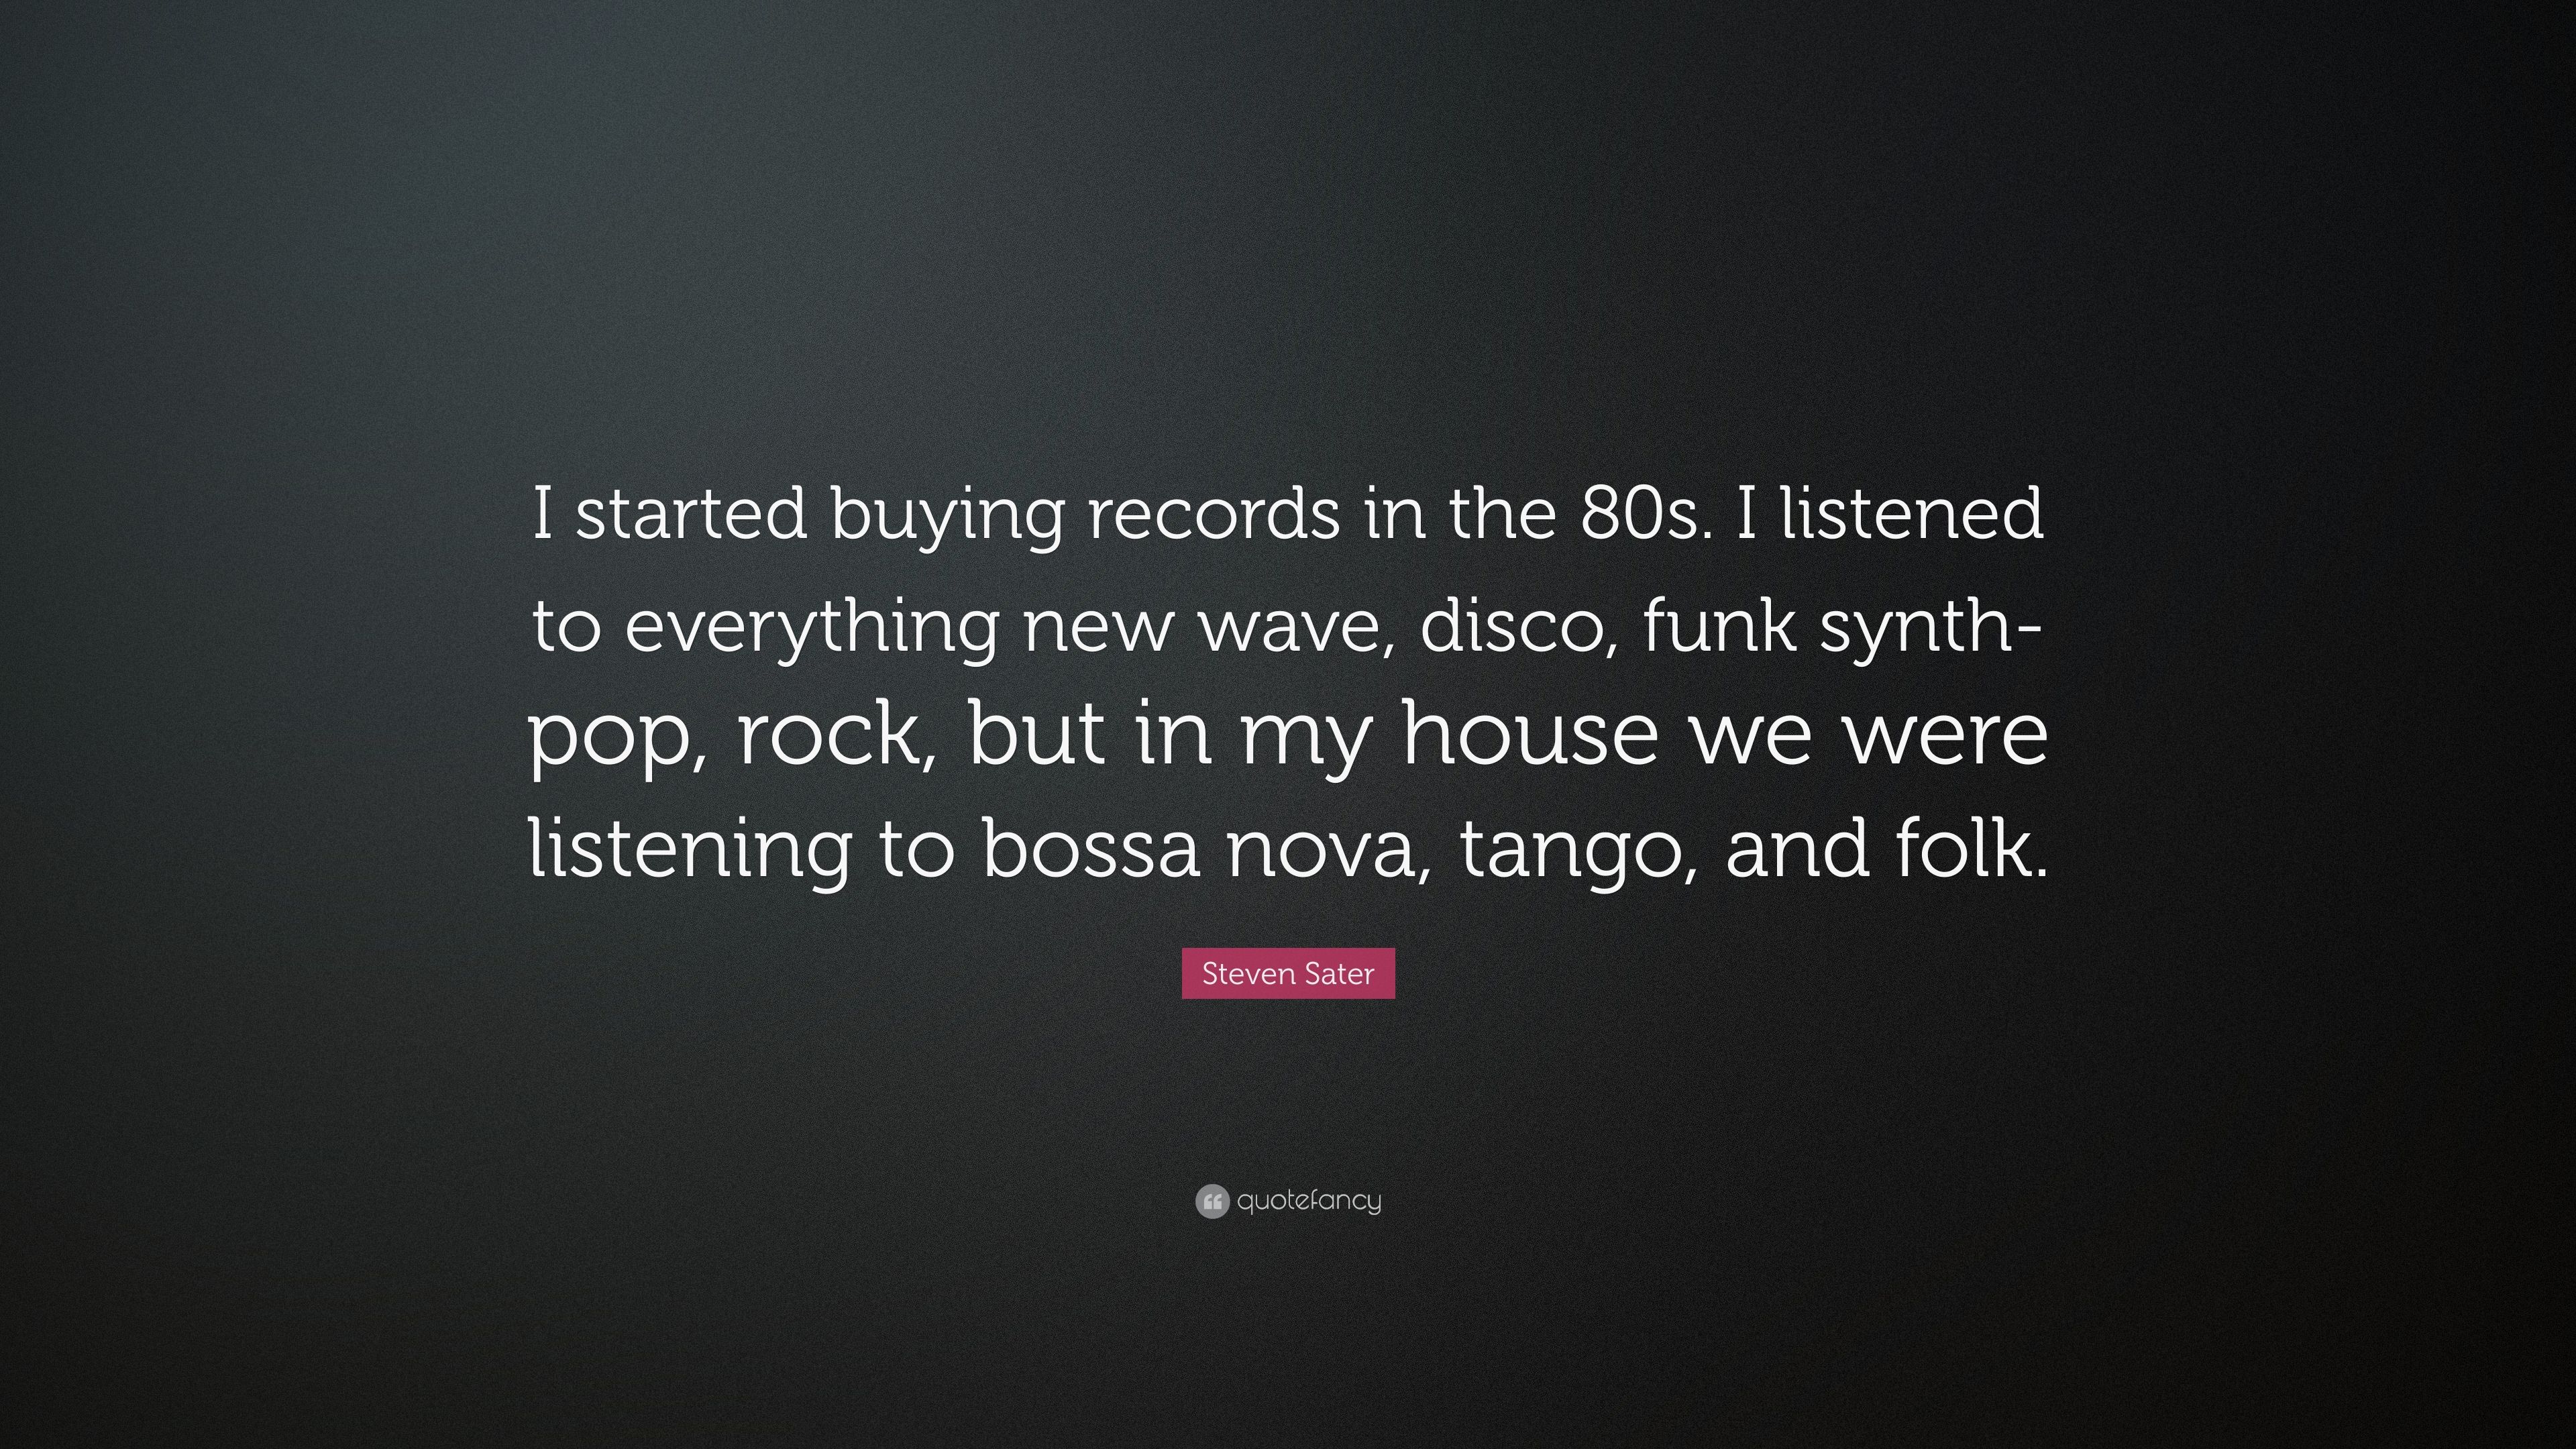 Steven Sater Quote: “I started buying records in the 80s. I listened